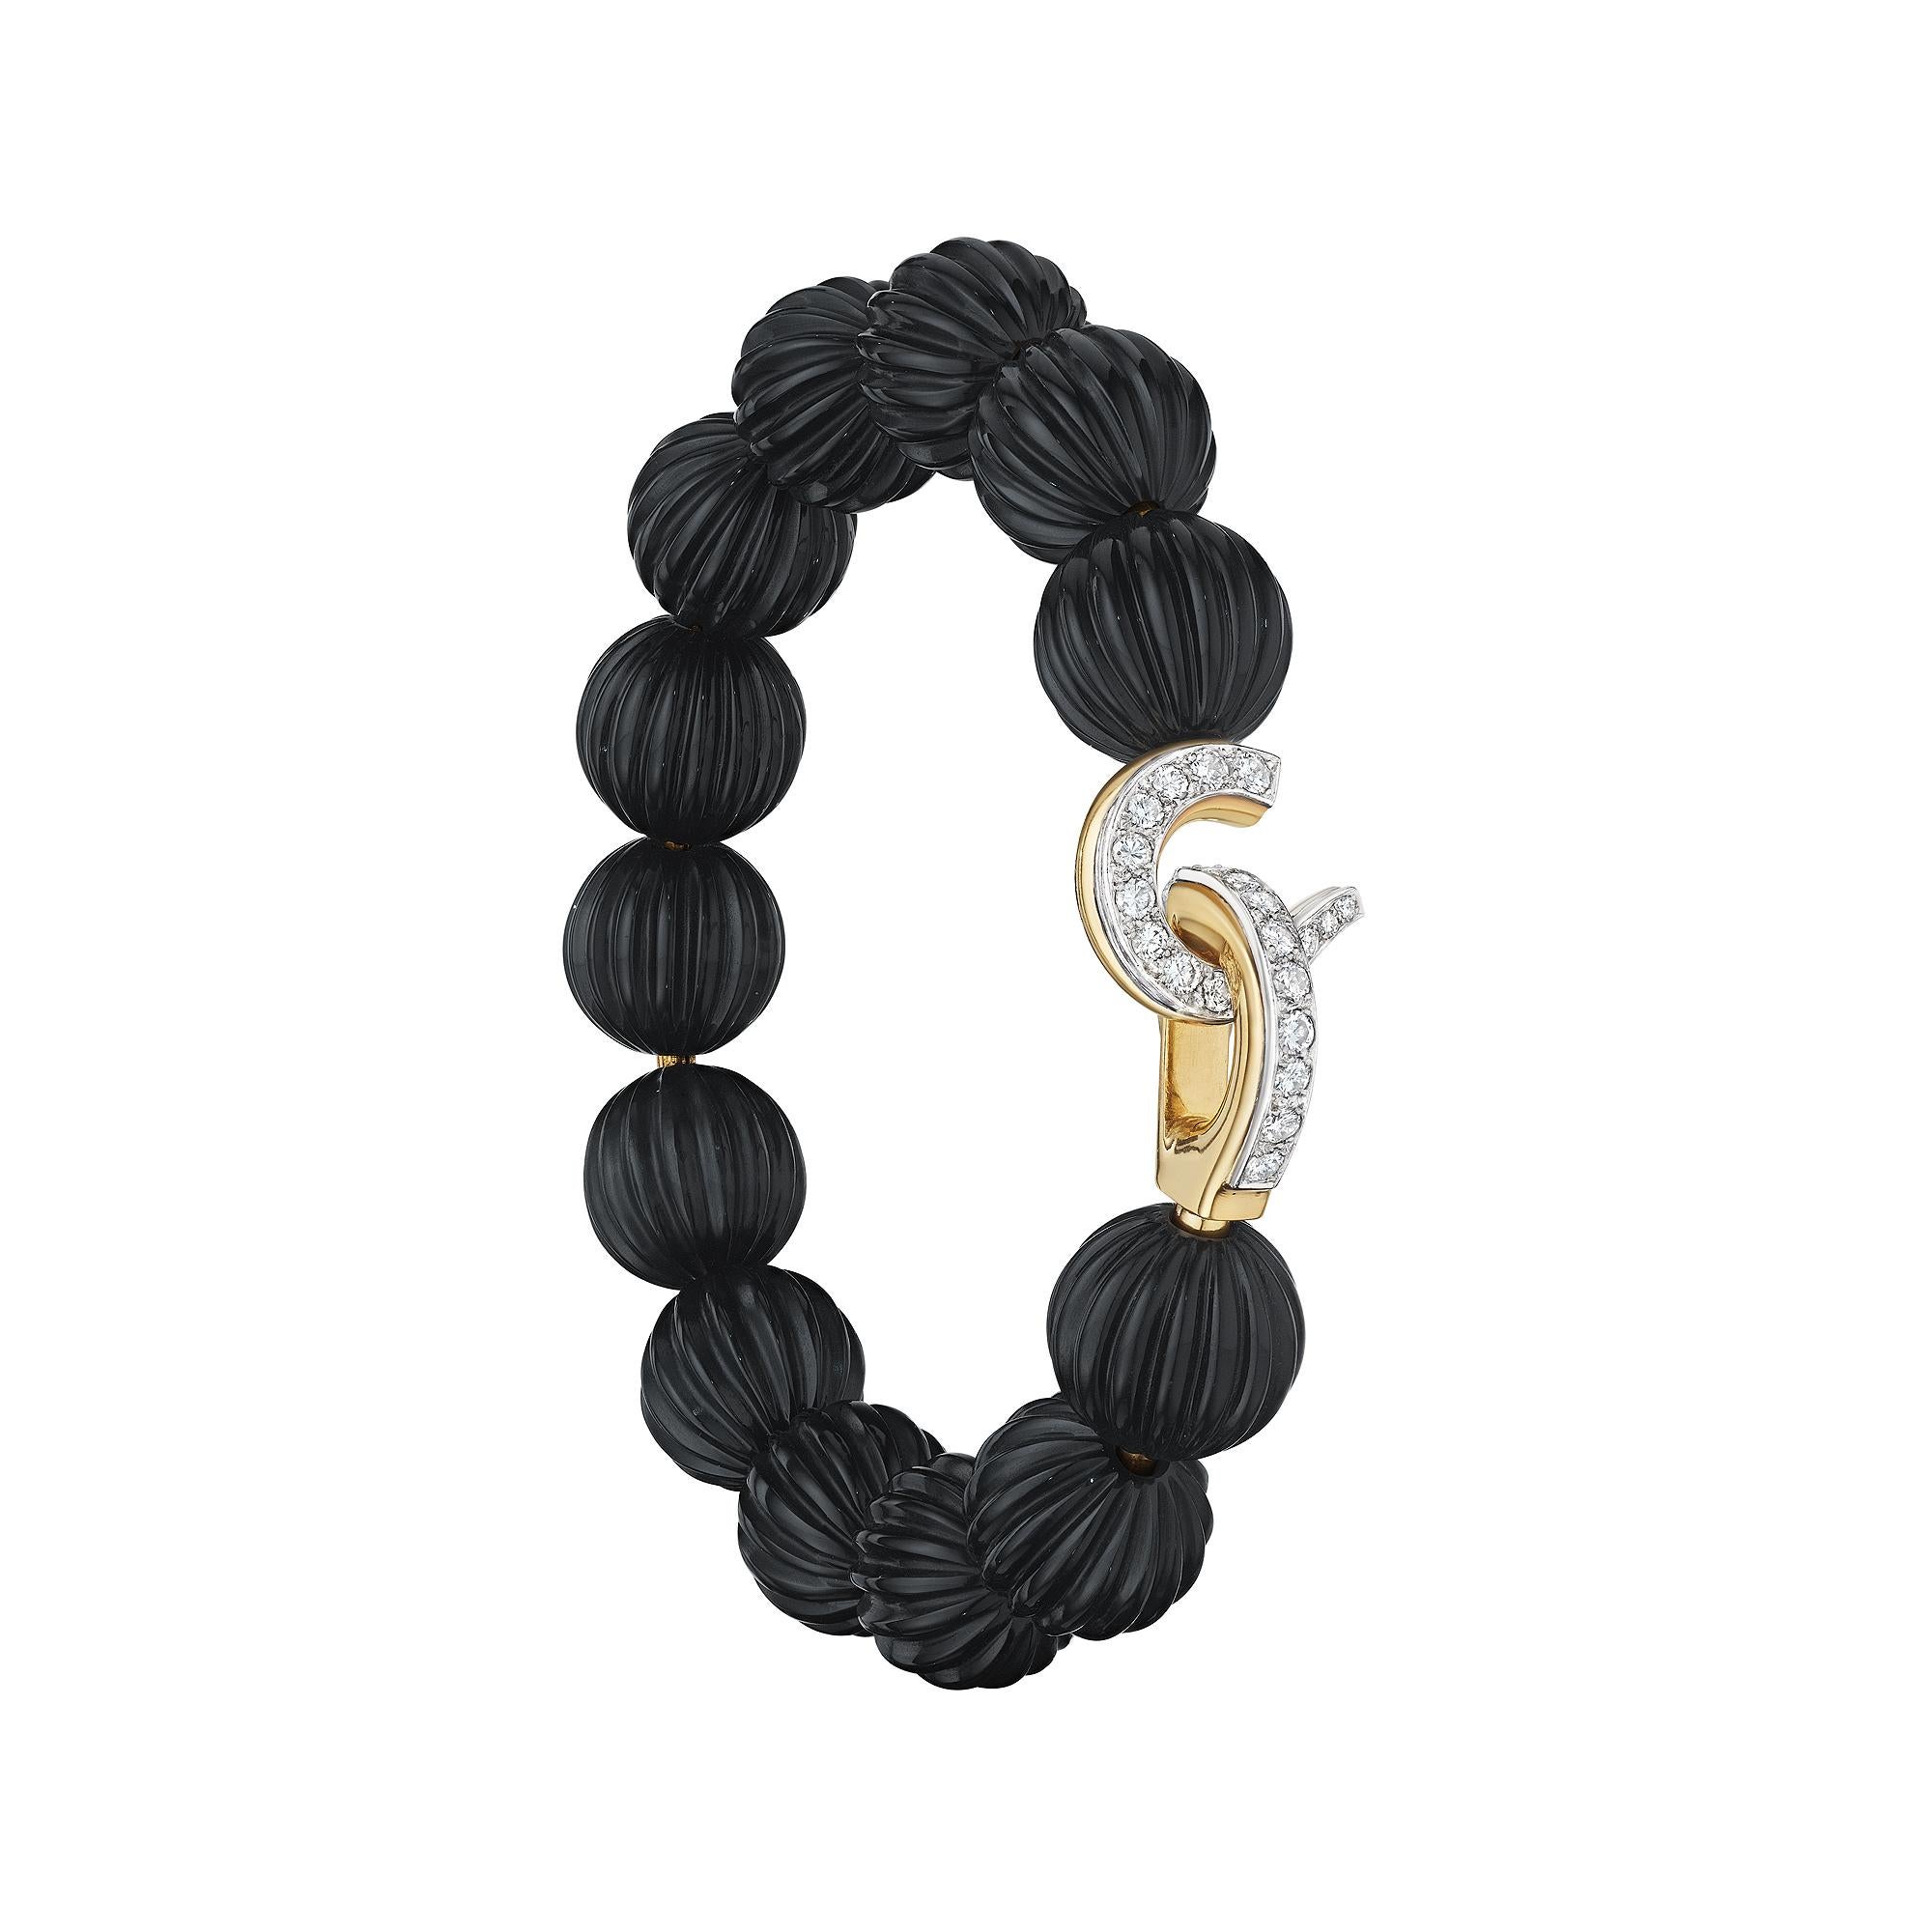 Elegantly dancing around the wrist these 13 carved black onyx melon shaped beads create a compelling Cartier Paris vintage diamond and 18 karat yellow gold bracelet that is both collectible and hard to resist.  The eye-catching diamond hook and eye